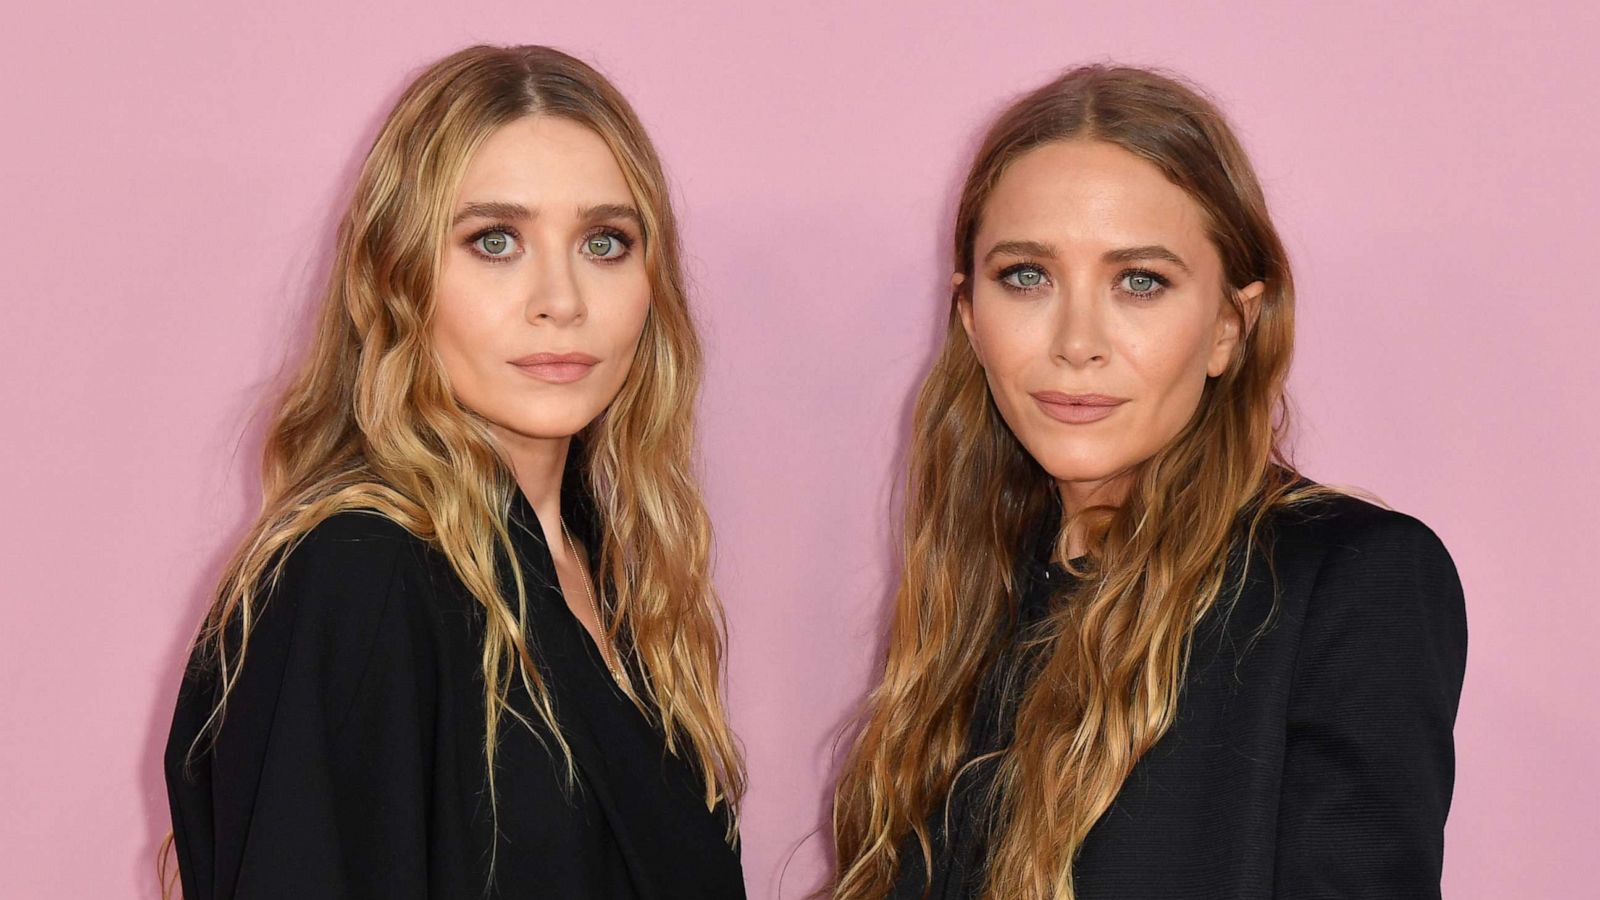 The History of Mary-Kate and Ashley's Fashion Brand The Row